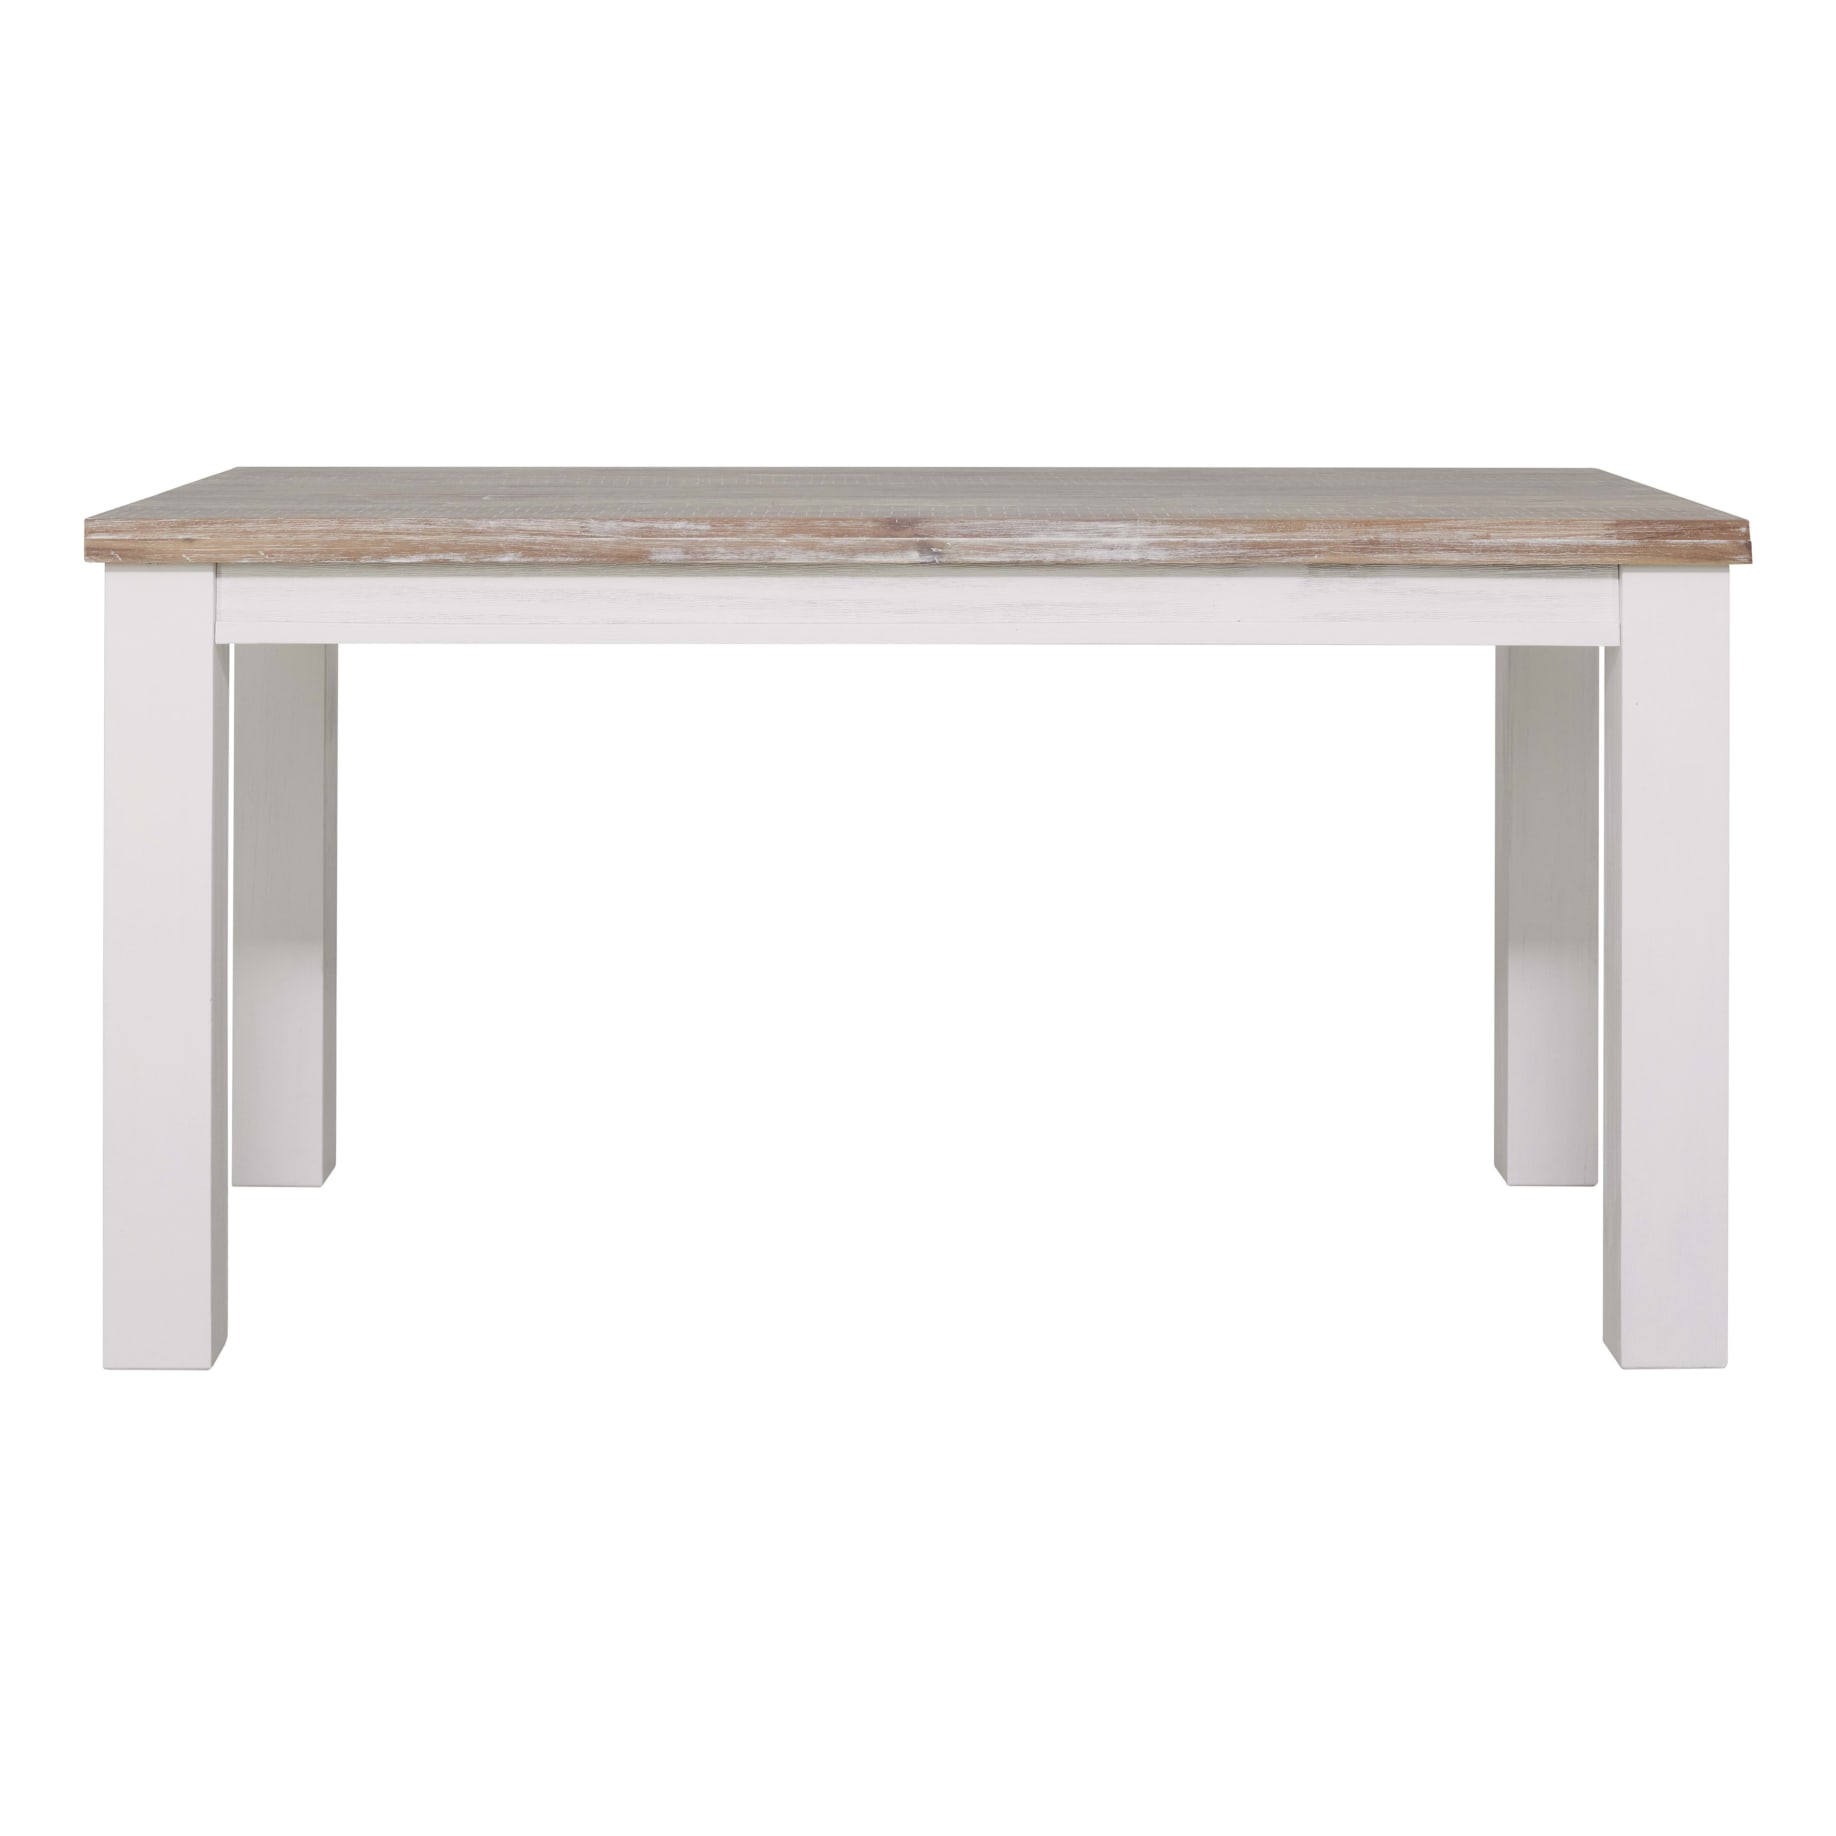 Halifax Dining Table 150cm in Acacia Grey / White